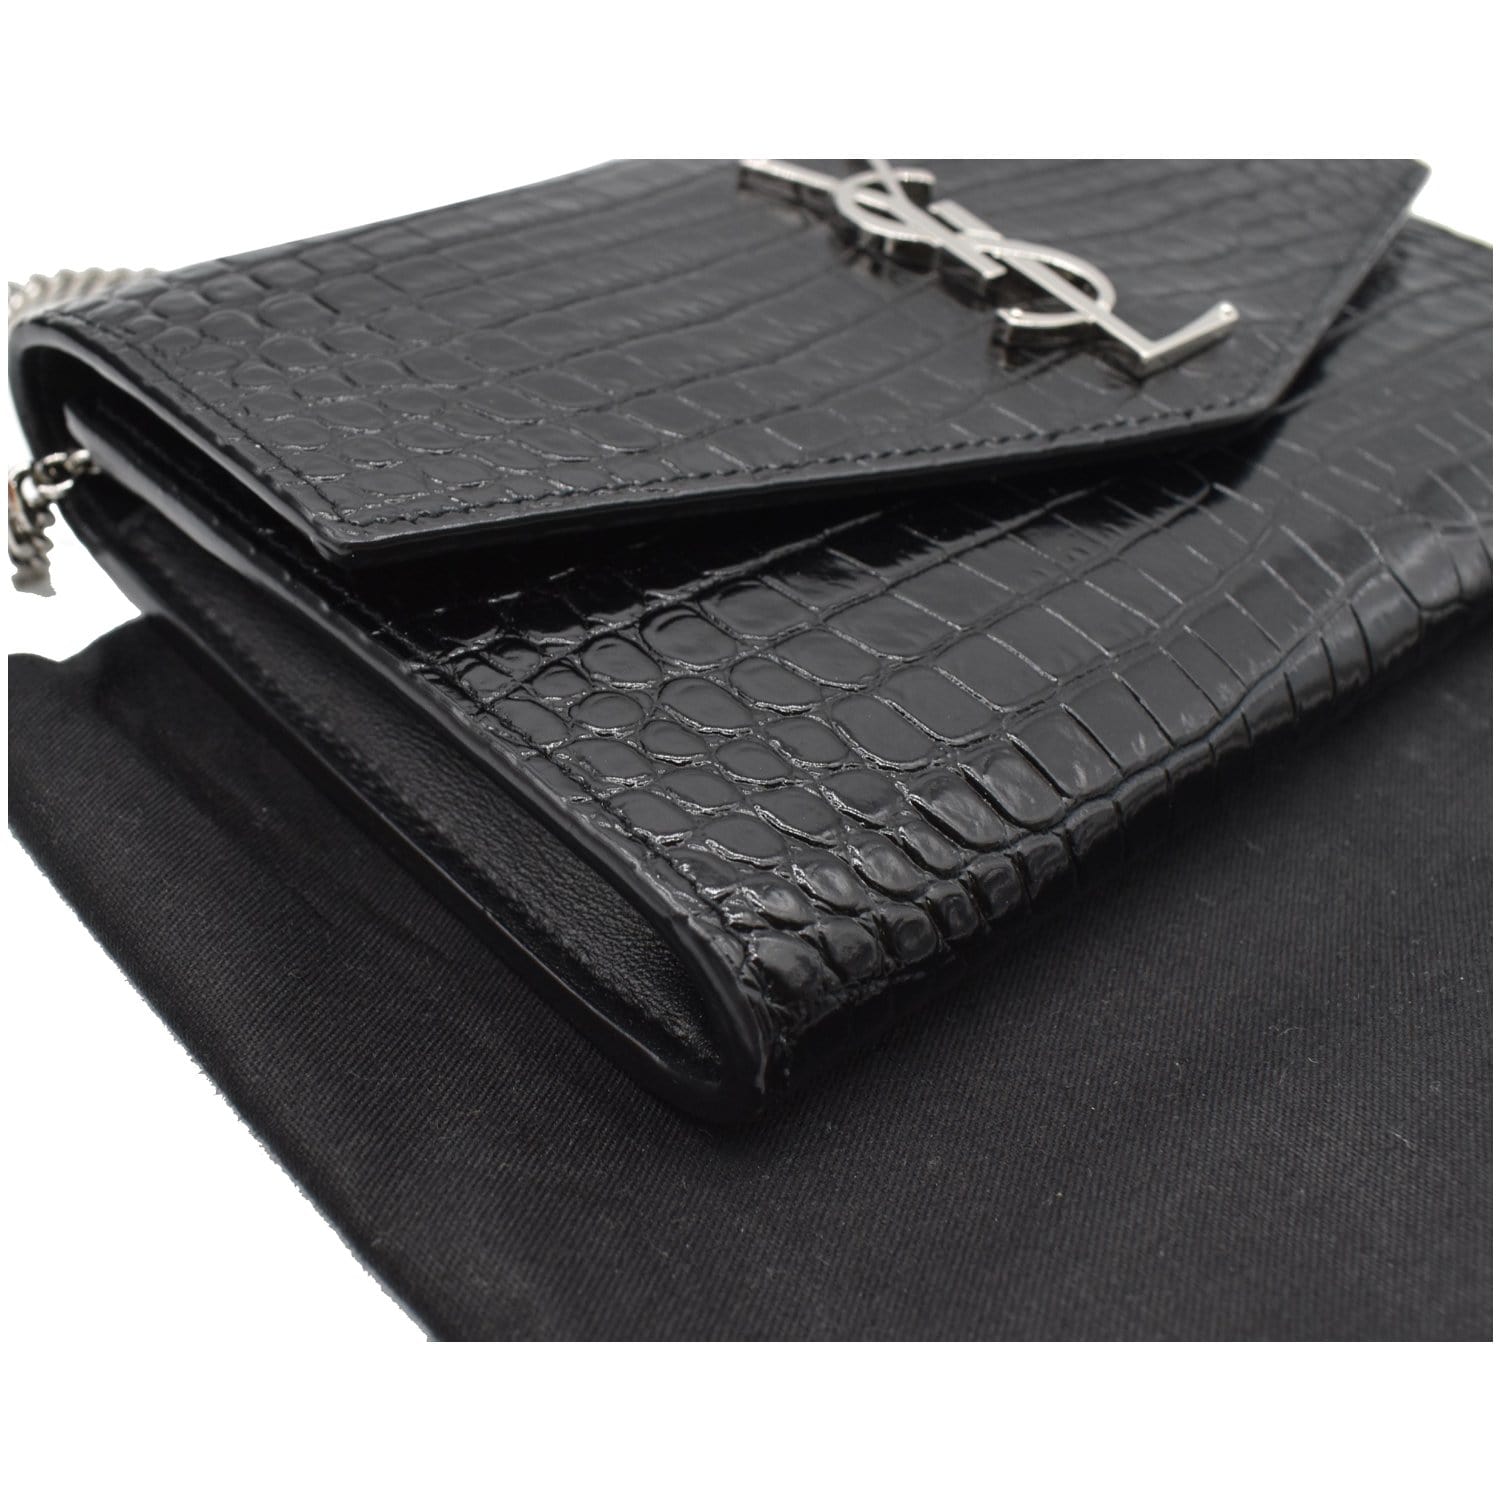 Saint Laurent Uptown Croc Embossed Leather Pouch in Black